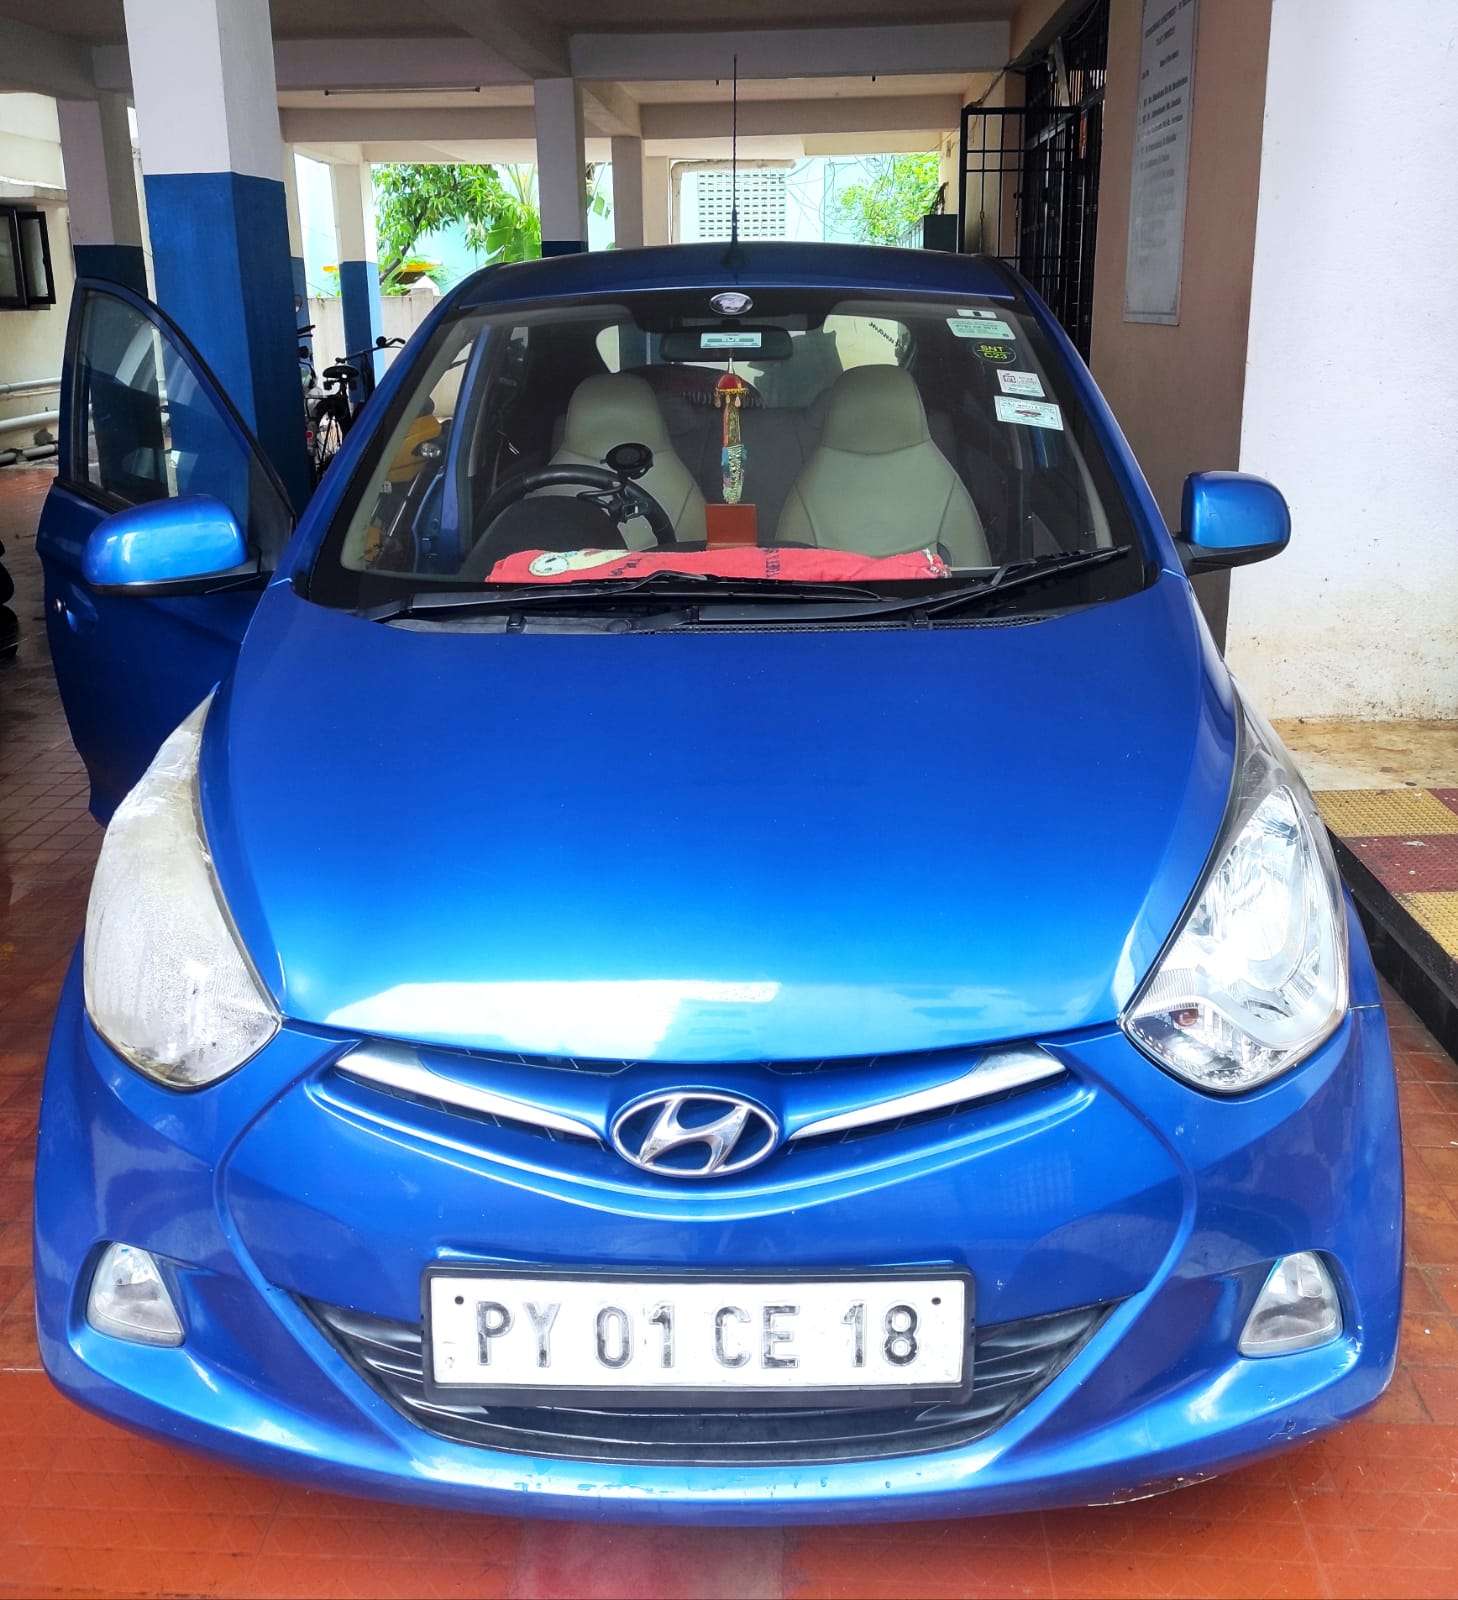 3270-for-sale-Hyundai-Eon-Petrol-Second-Owner-2014-PY-registered-rs-240000